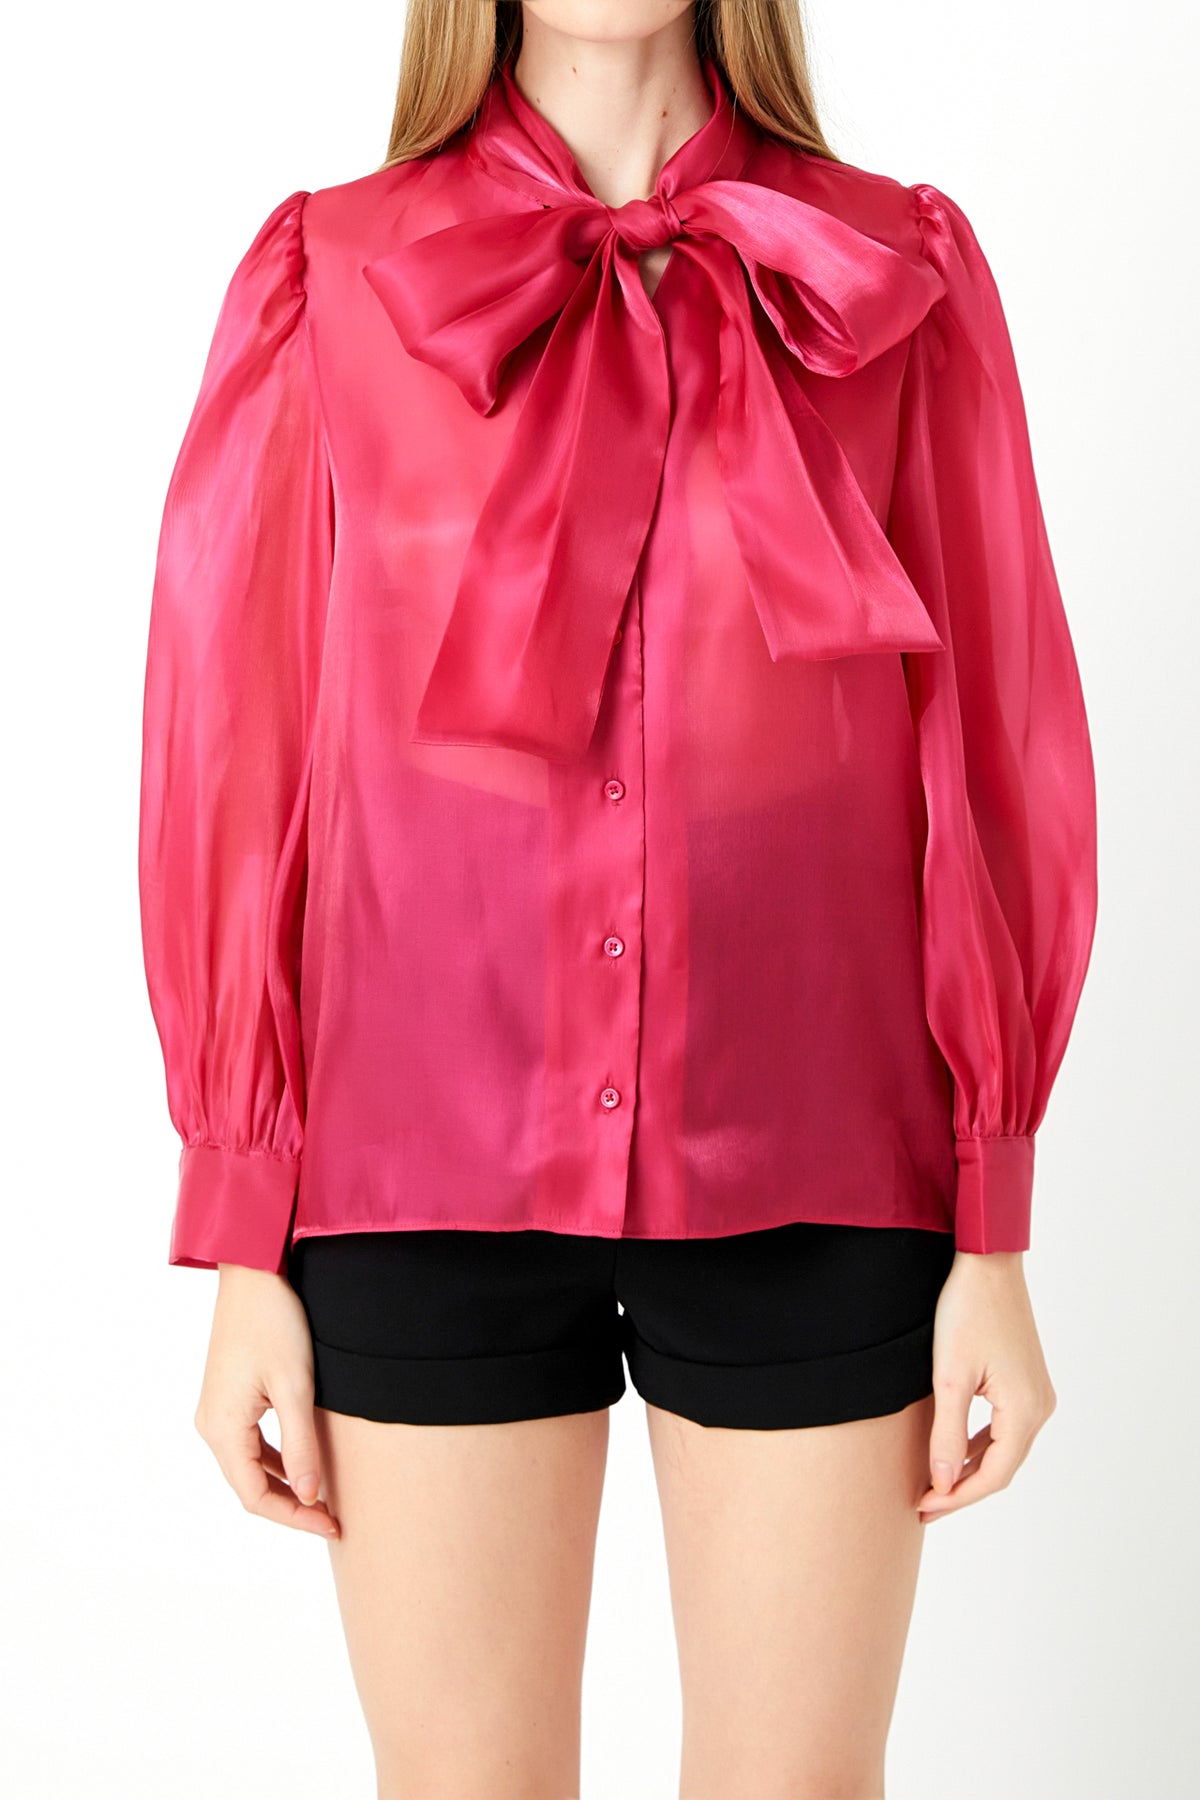 ENDLESS ROSE - Organza Blouse Top - TOPS available at Objectrare